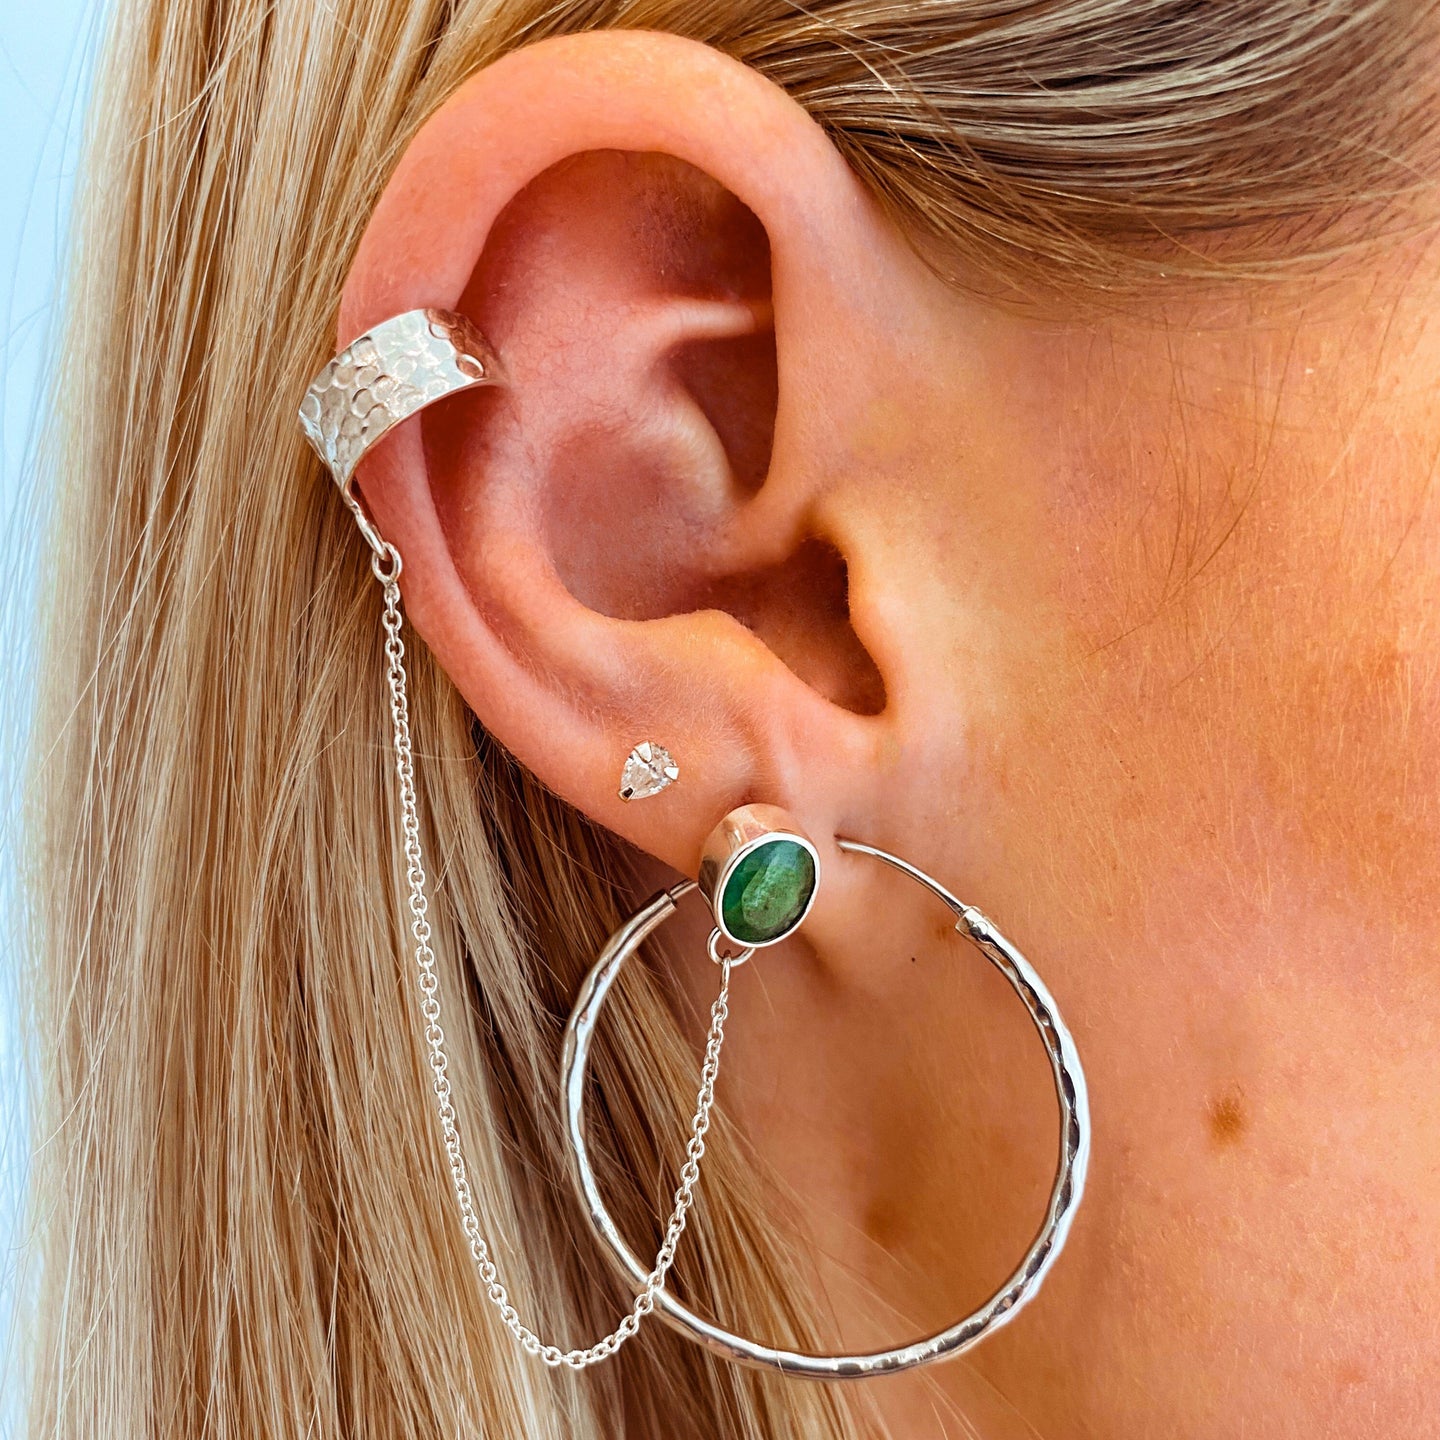 Jade Stud Earrings with Silver Cuff & Chain| Sterling silver 925